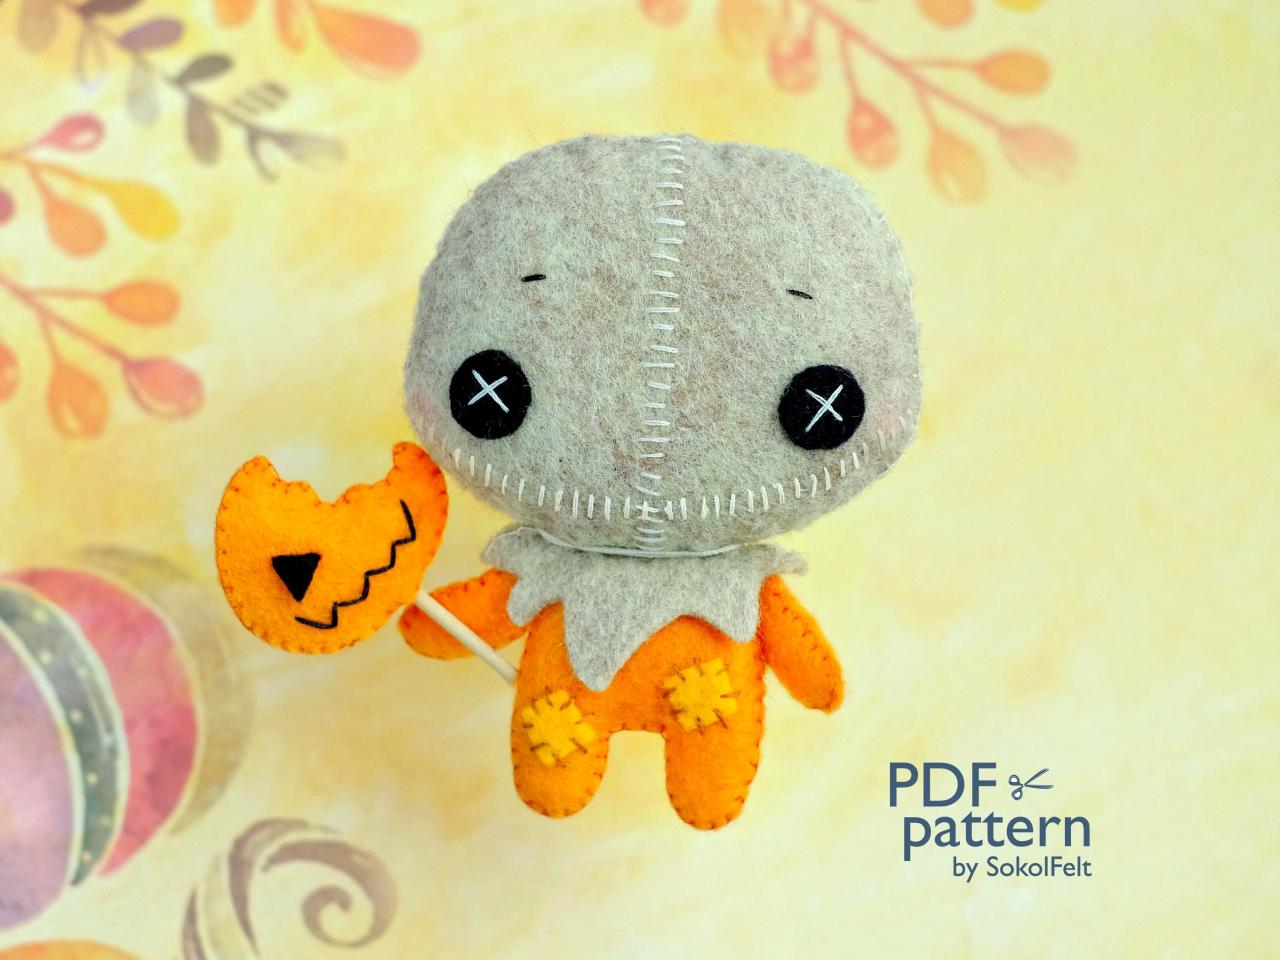 Trick Or Treat Sam Felt Toy Pdf And Svg Patterns, Ghost Of Halloween, Easy To Make Plush Toy For Halloween